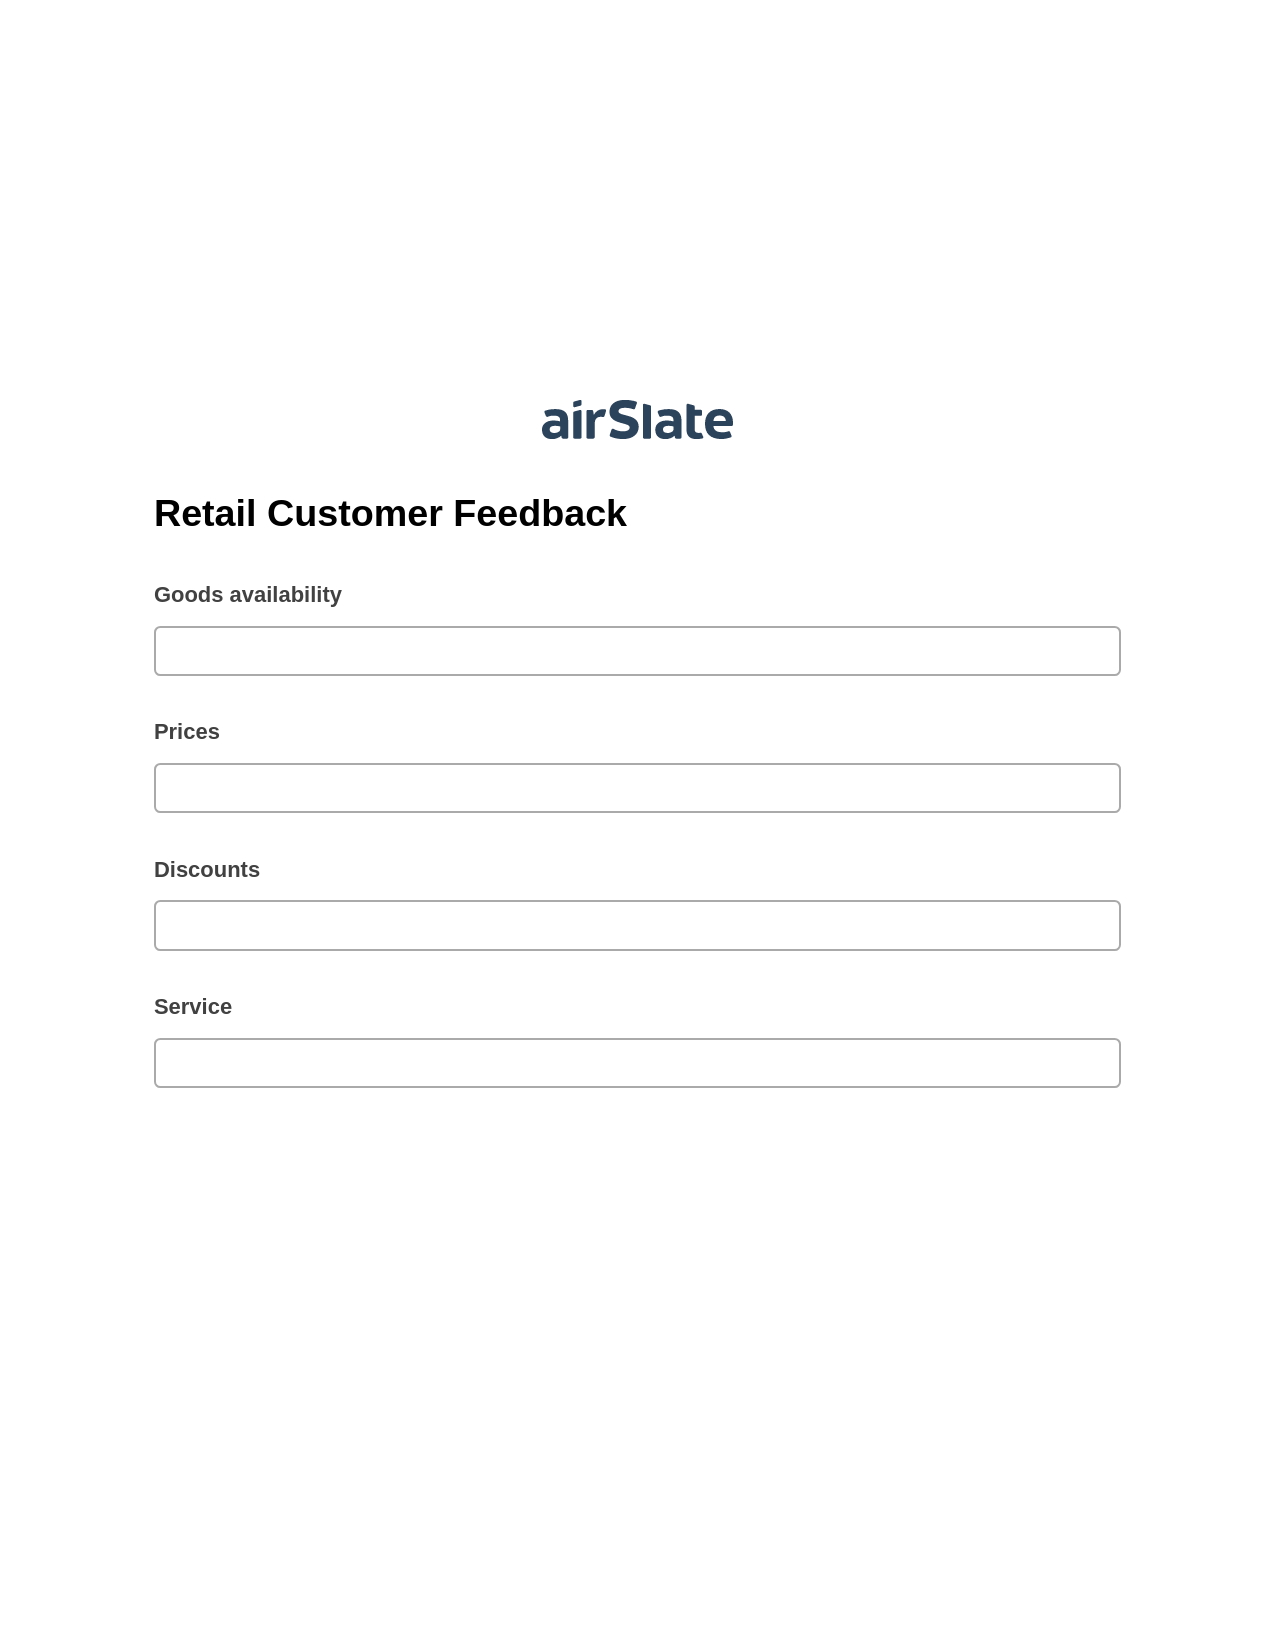 Retail Customer Feedback Pre-fill from CSV File Bot, Slack Notification Bot, Export to NetSuite Record Bot